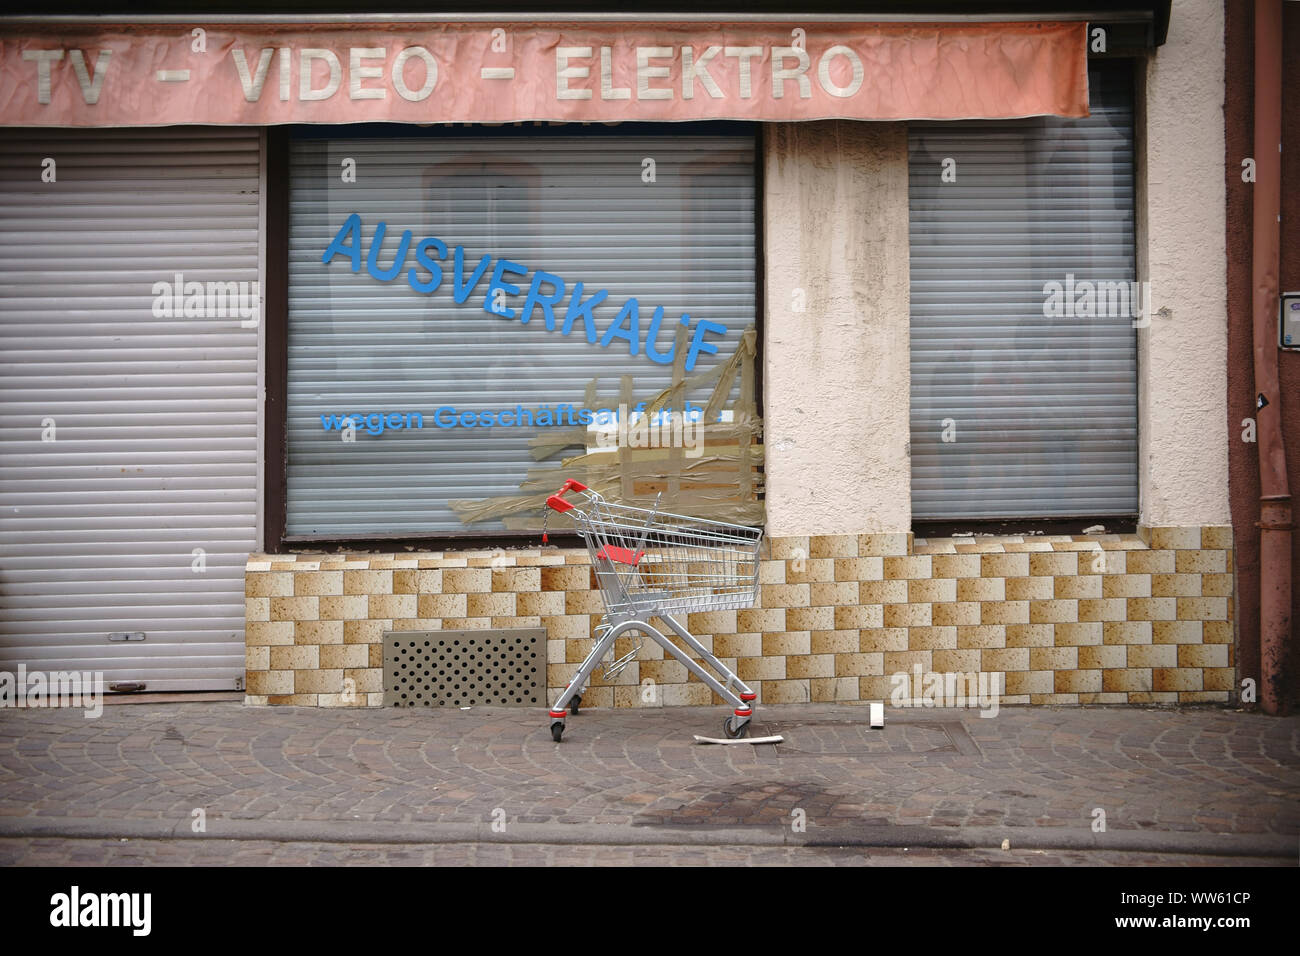 An empty shopping cart on the sidewalk in front of a closed electric goods shop with broken window pane, Stock Photo